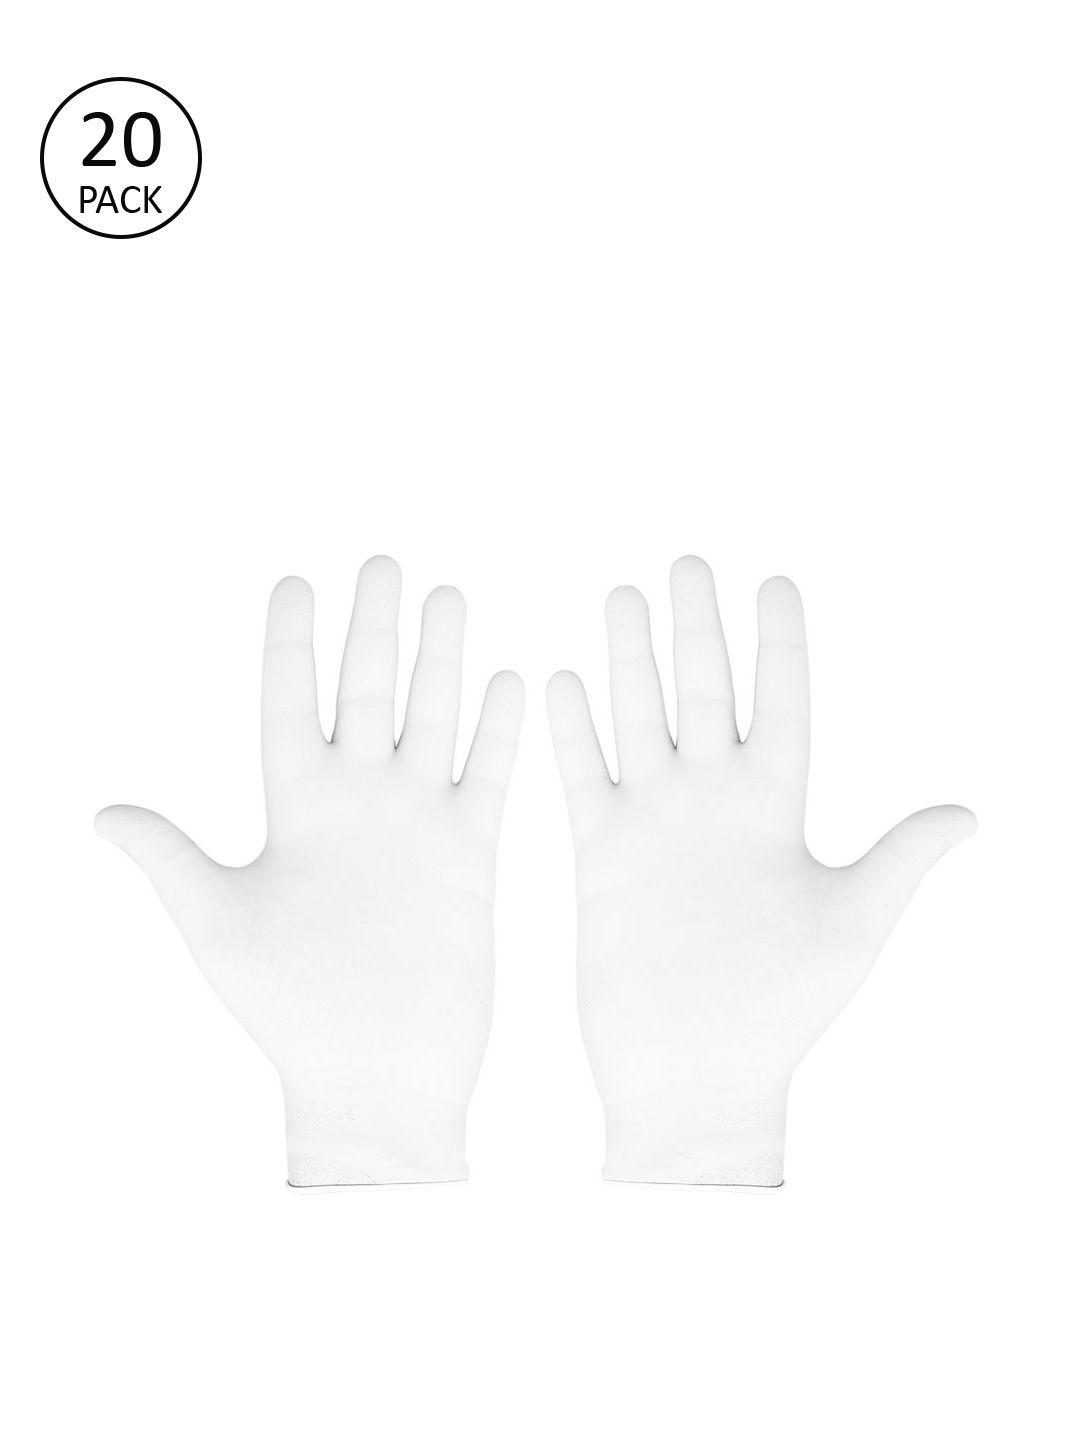 london fashion hob unisex pack of 20 white solid surgical disposable hand gloves